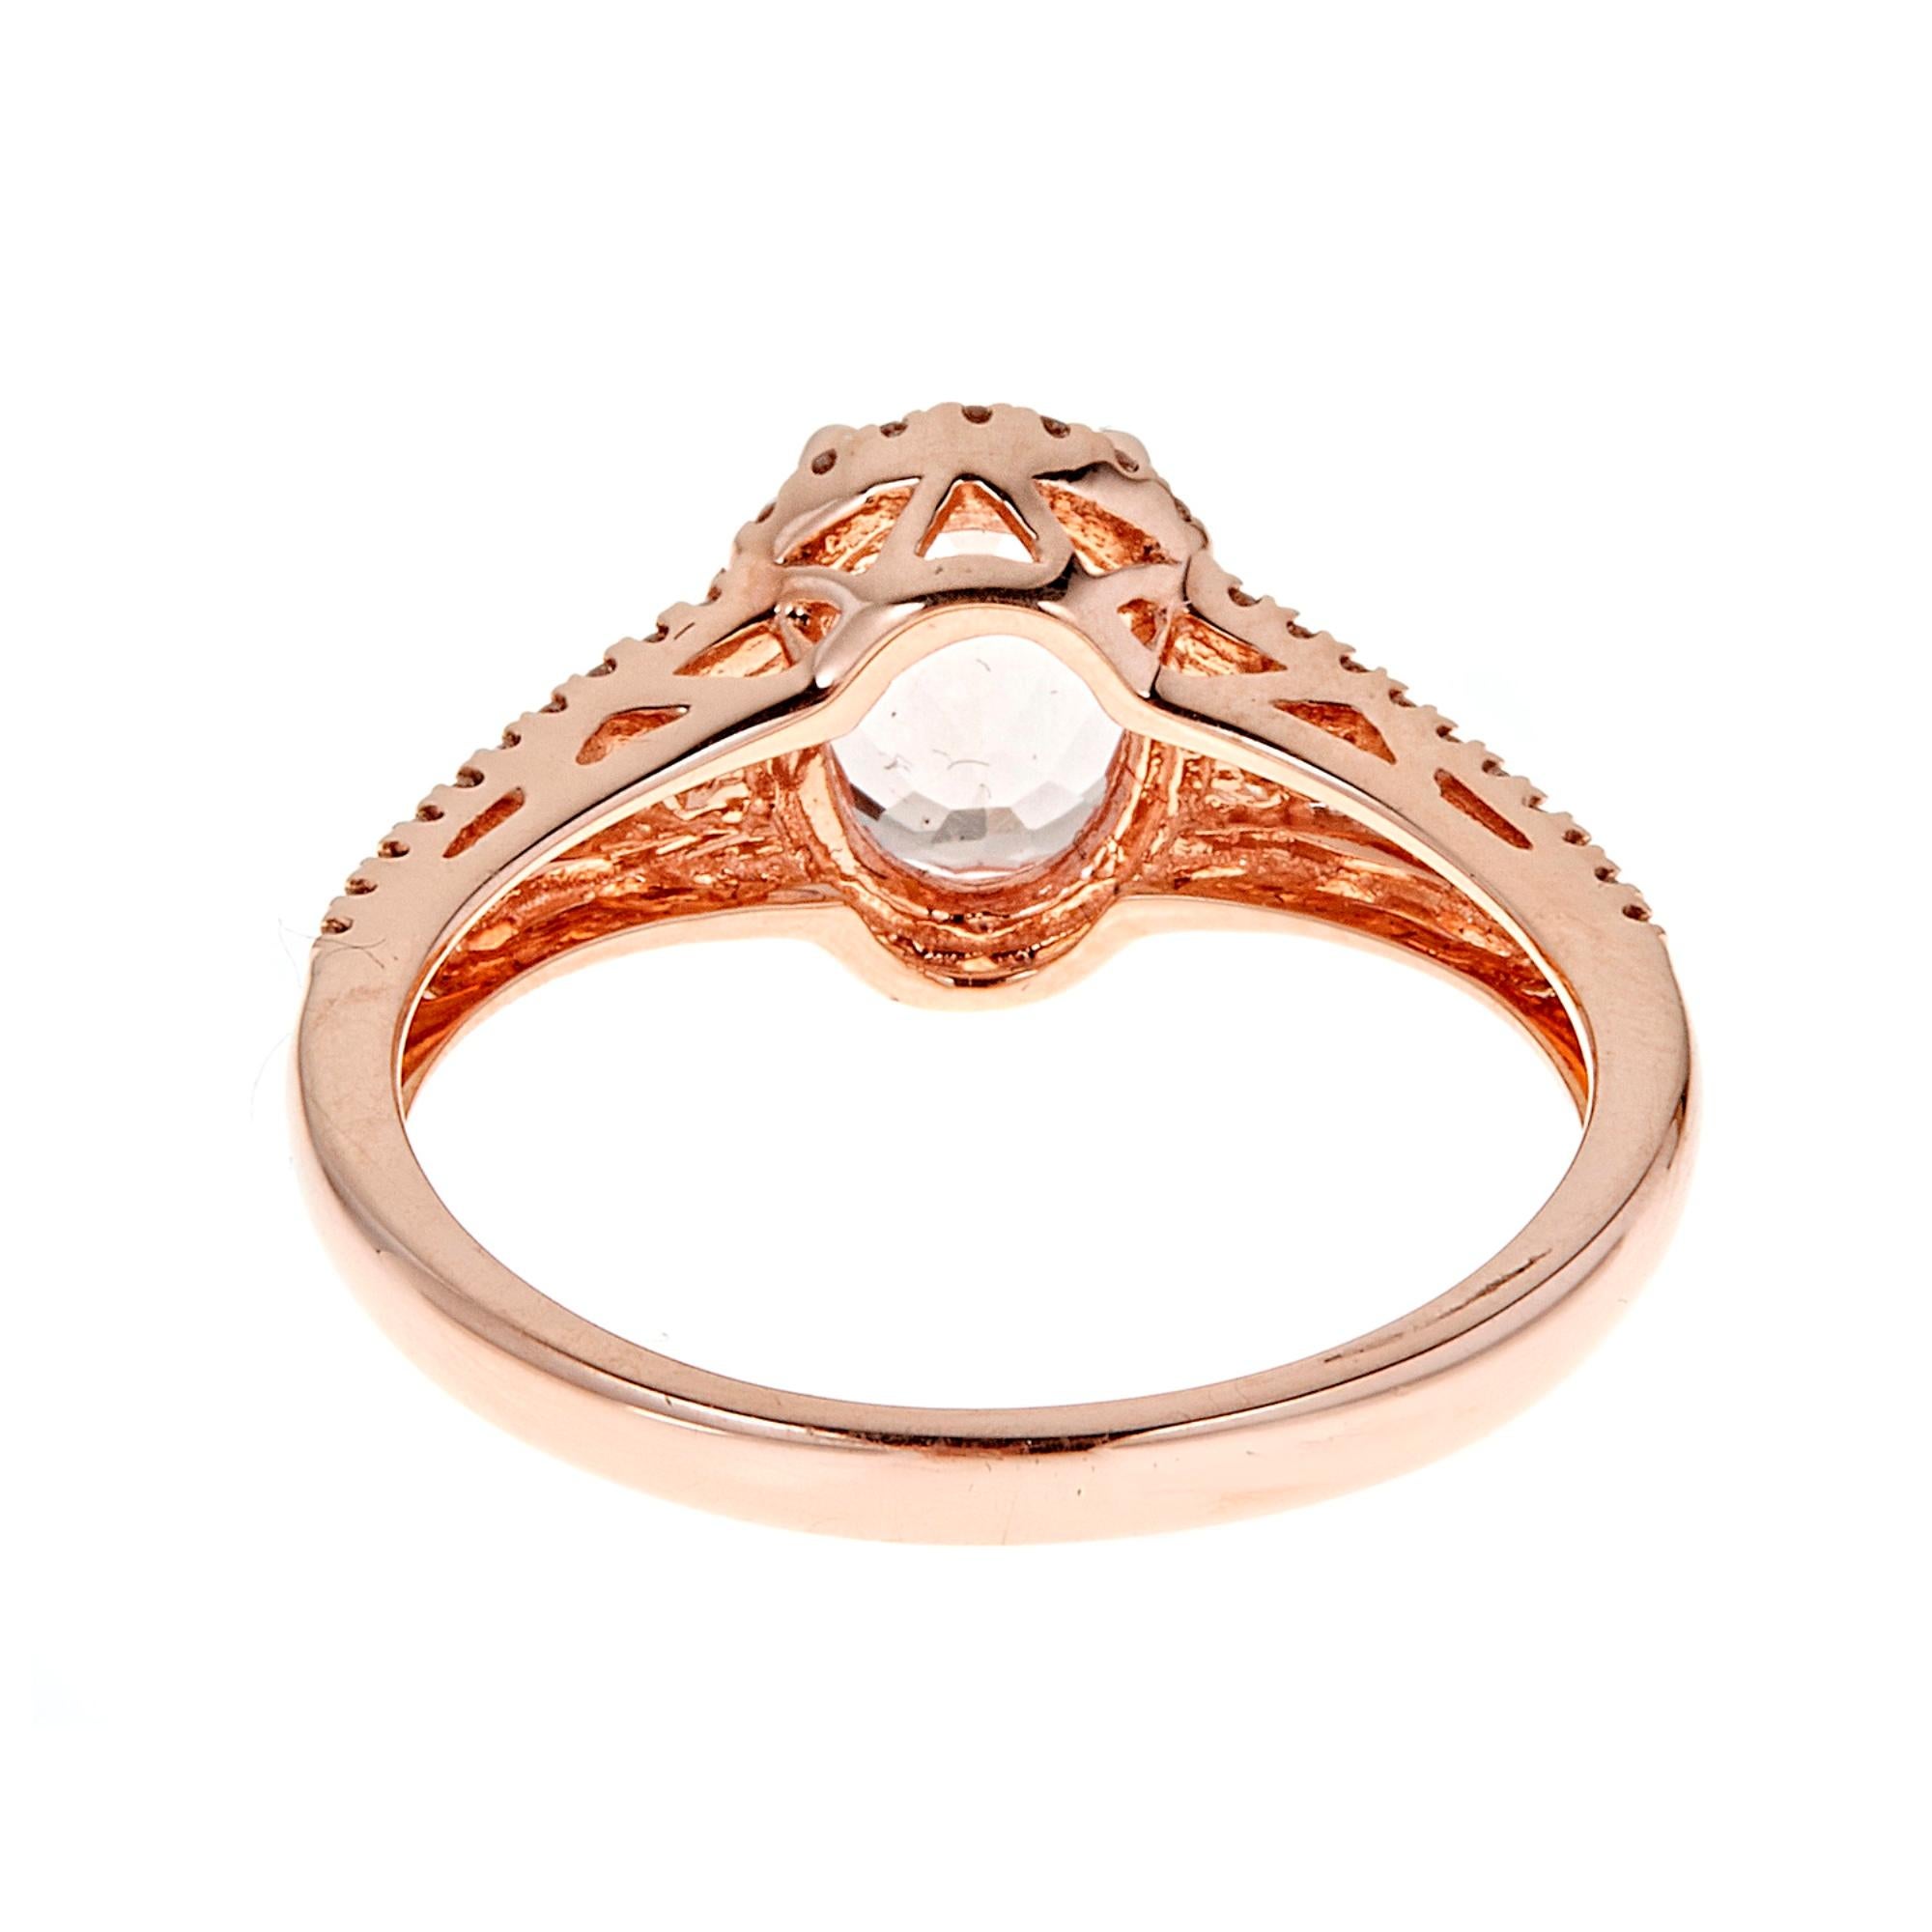 Oval Cut 1.07 Carat Oval-Cut Morganite Diamond Accents 14K Rose Gold Ring For Sale